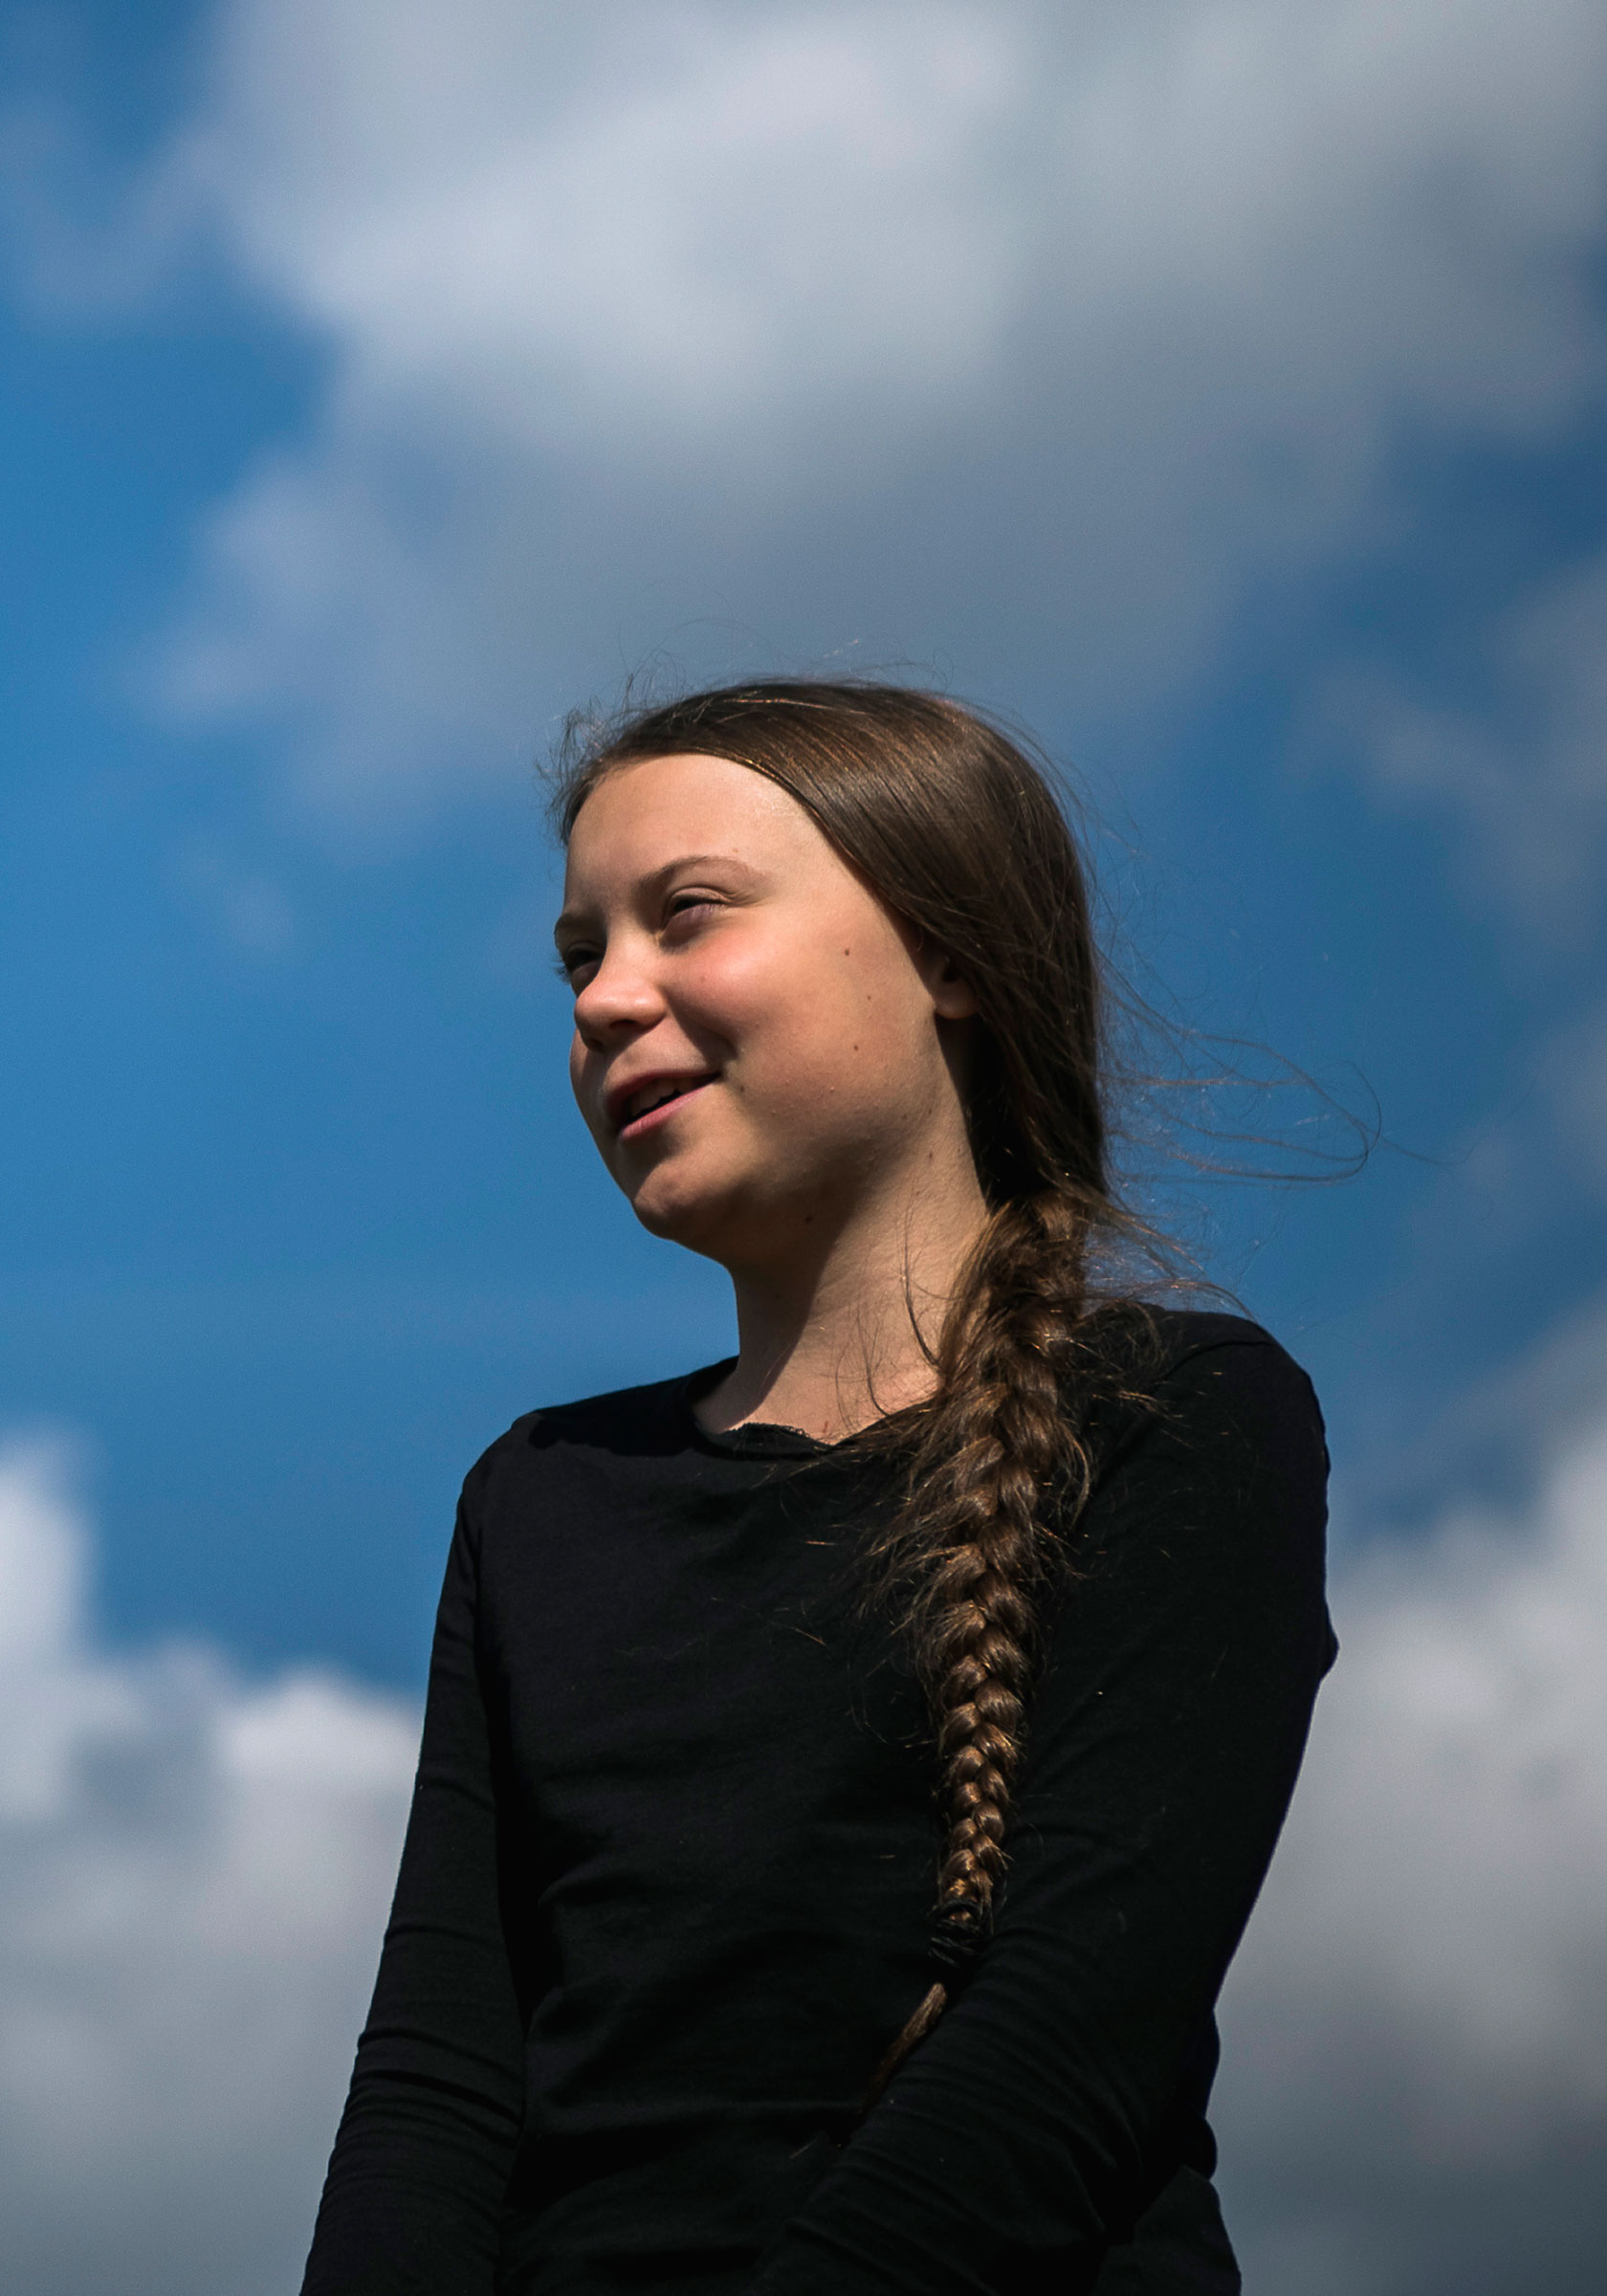 Greta Thunberg, the 16-year-old Swedish climate activist, is interviewed ahead of the "Global Strike For Future" movement on a global day of student protests aiming to spark world leaders into action on climate change in Stockholm